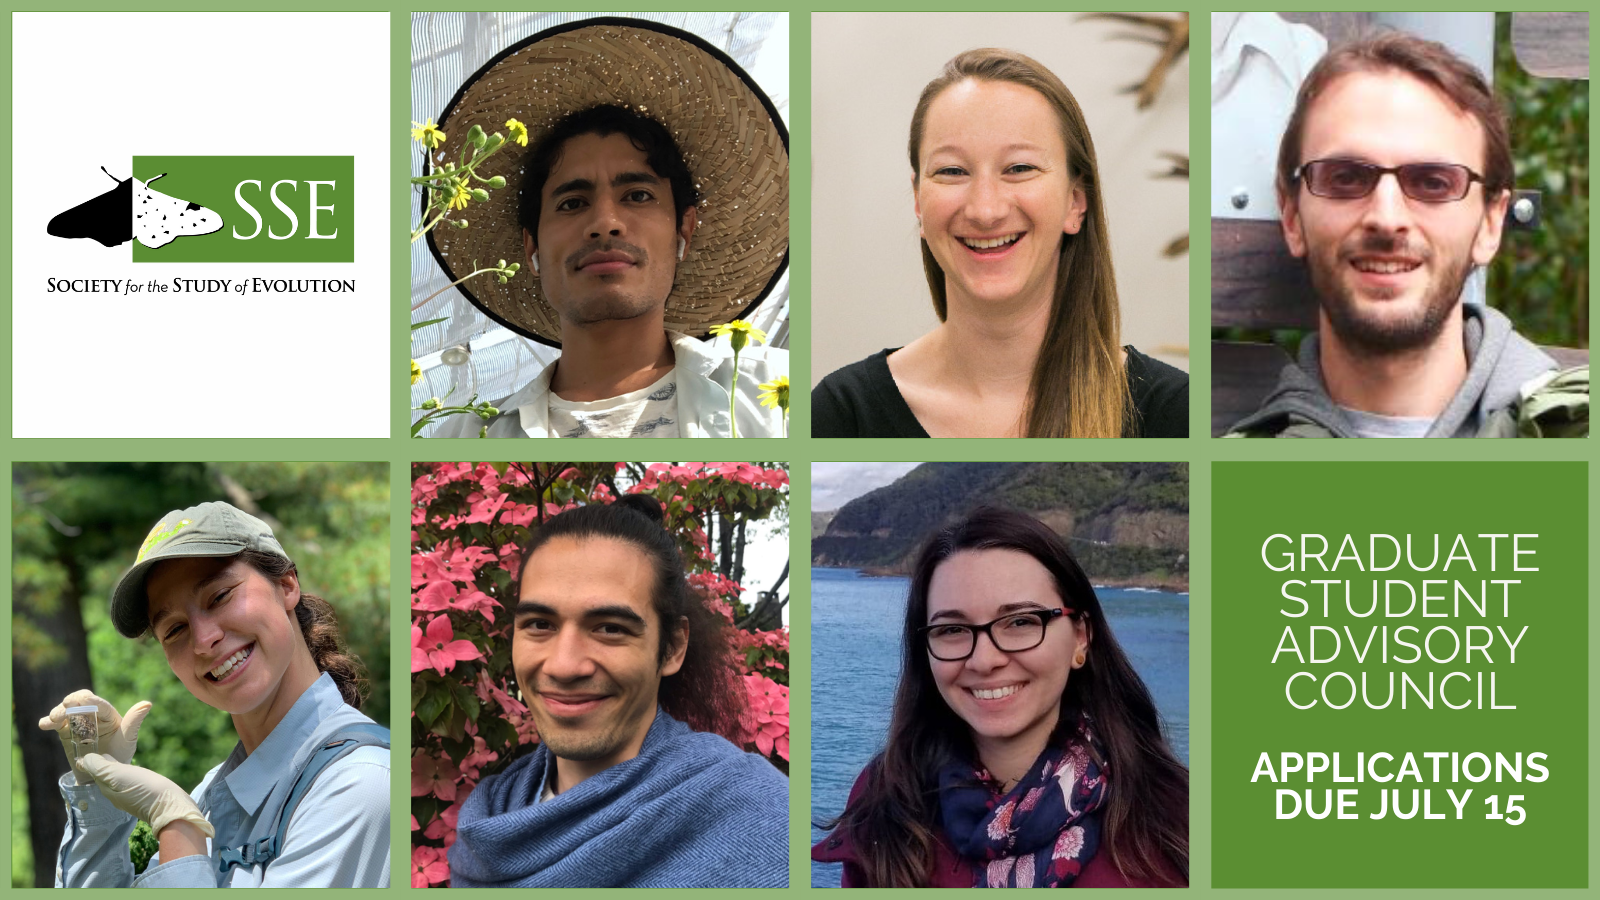 A grid of images showing headshots of the current Graduate Student Advisory Council members, with the SSE logo. Text: Graduate Student Advisory Council Applications due July 15.